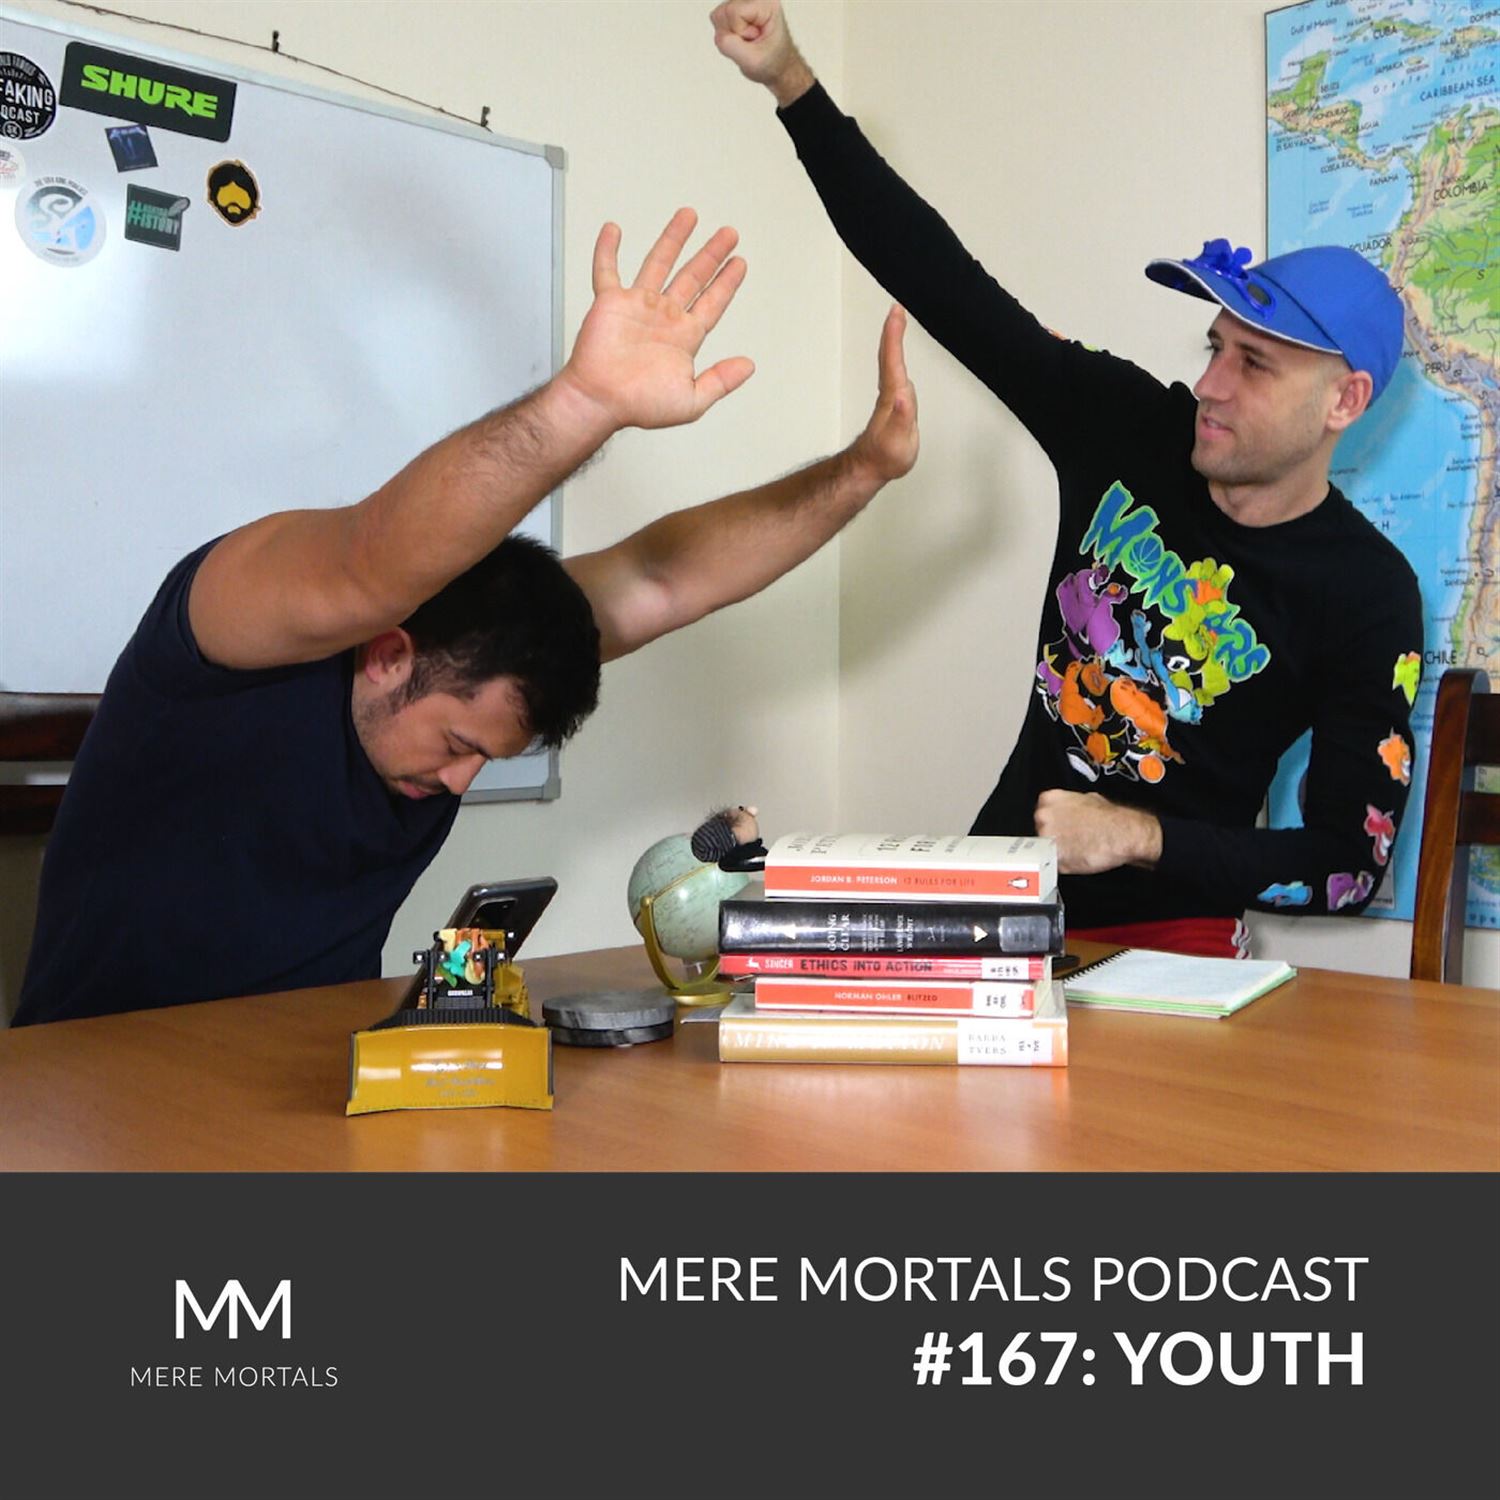 Would You Actually Want To Be Young Again? (Episode #167 - Youth)